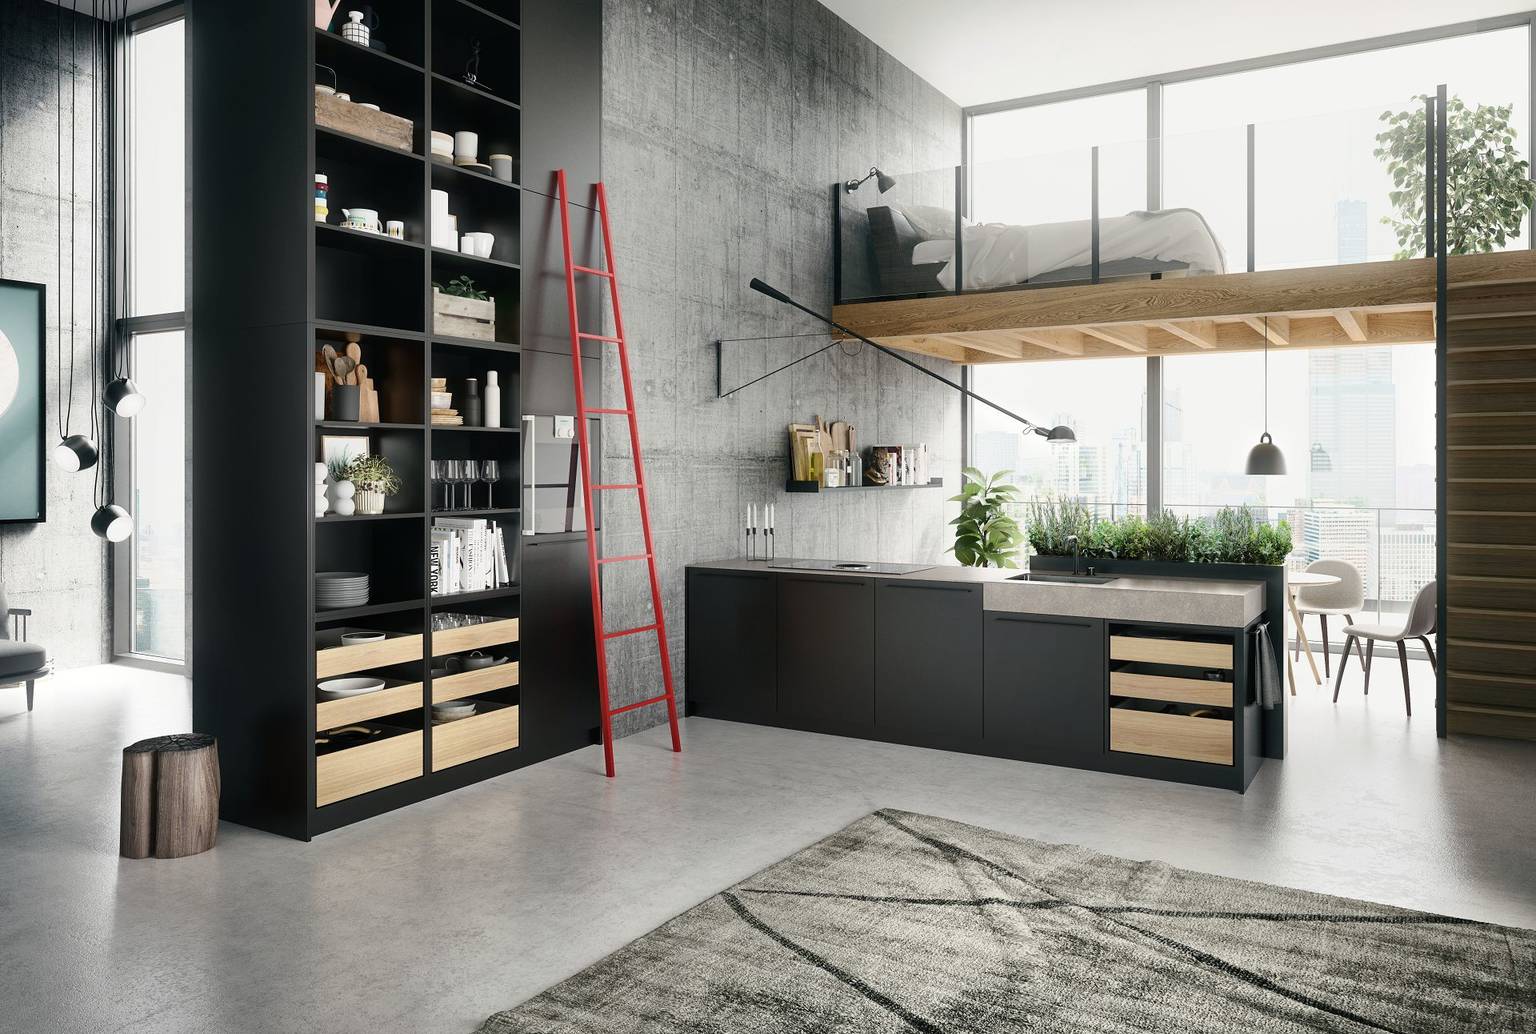 SieMatic philosophy: Unique kitchen solutions for design, organization and equipment